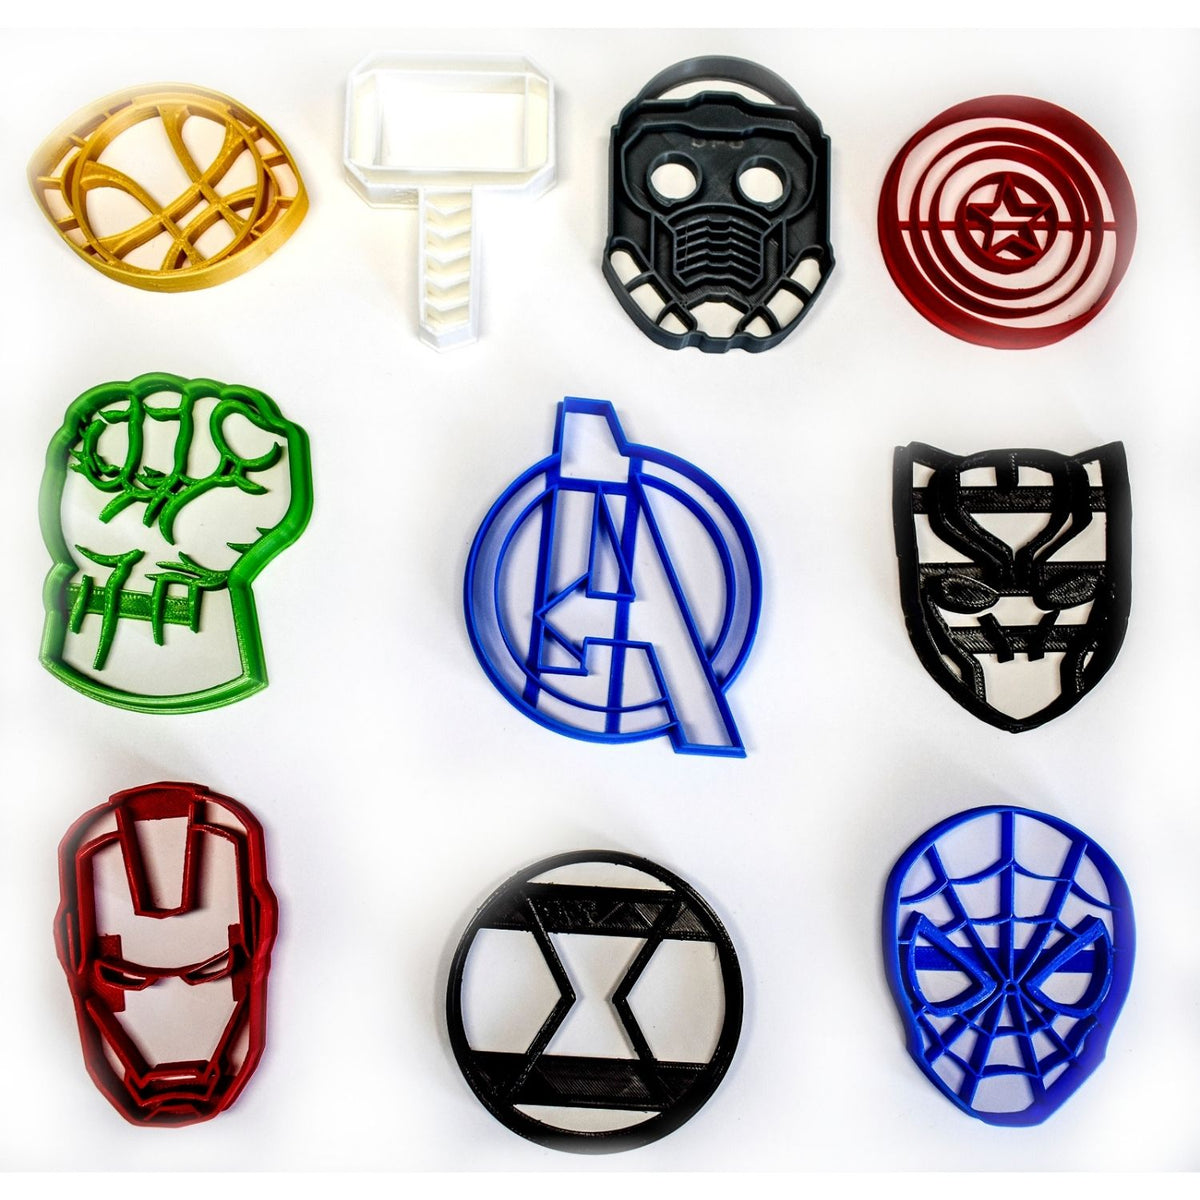 Avengers Infinity War Marvel Logos Set Of 10 Cookie Cutters USA ...